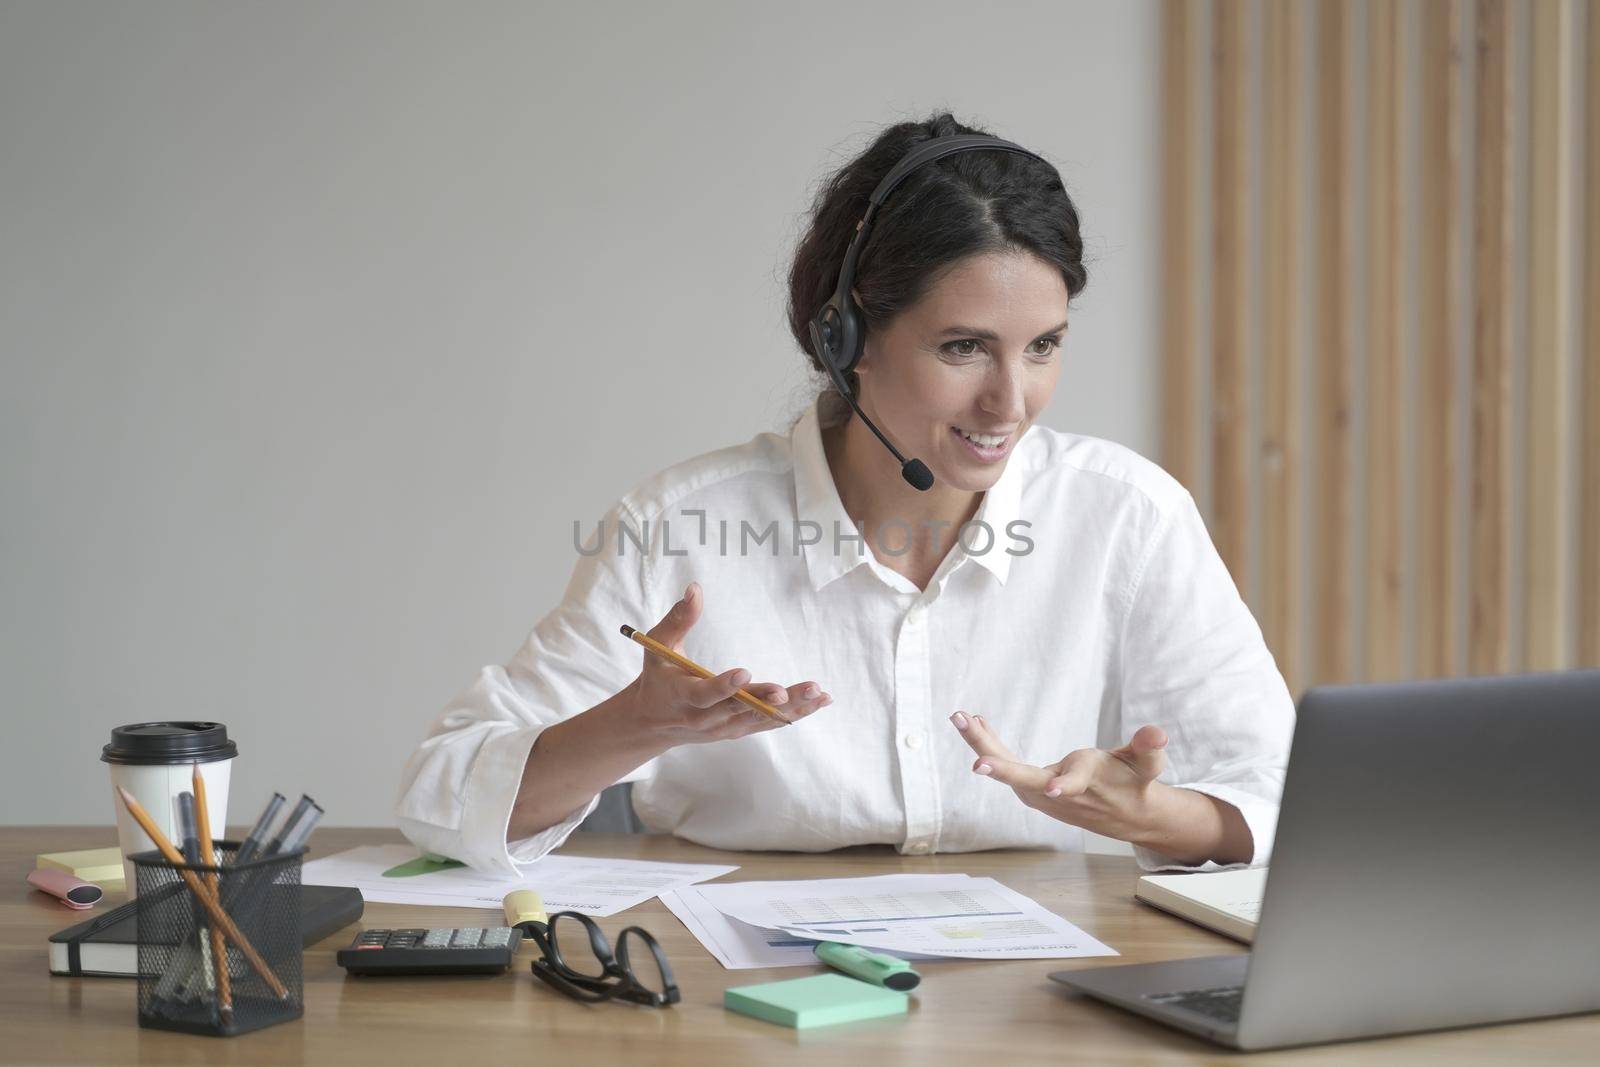 Smiling european woman online tutor sitting at desk in headset and talking by video call on laptop computer while working remotely in home office. Distance education and e-learning concept